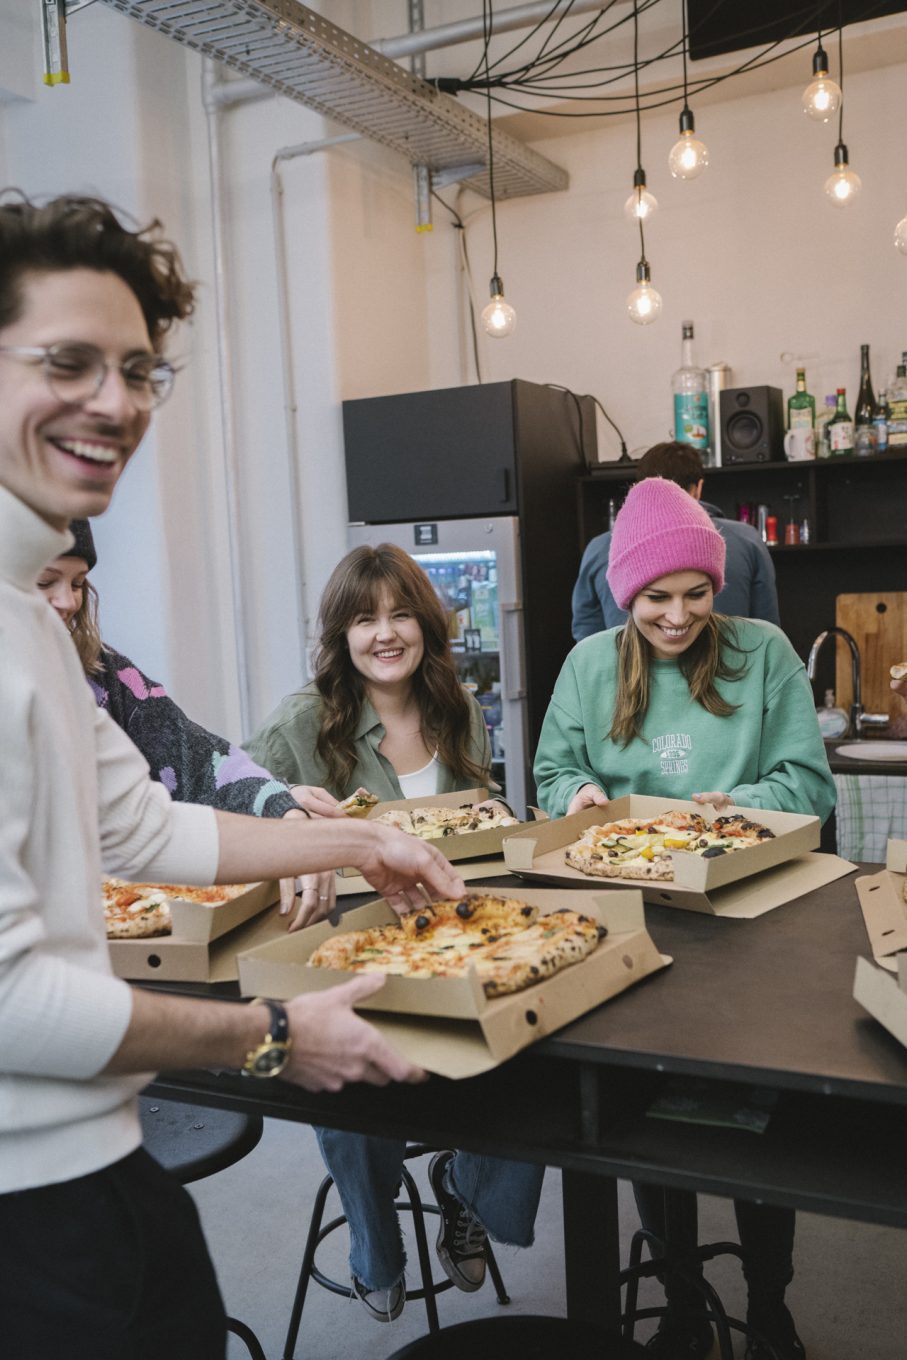 Three young people at a kitchen island eating pizza